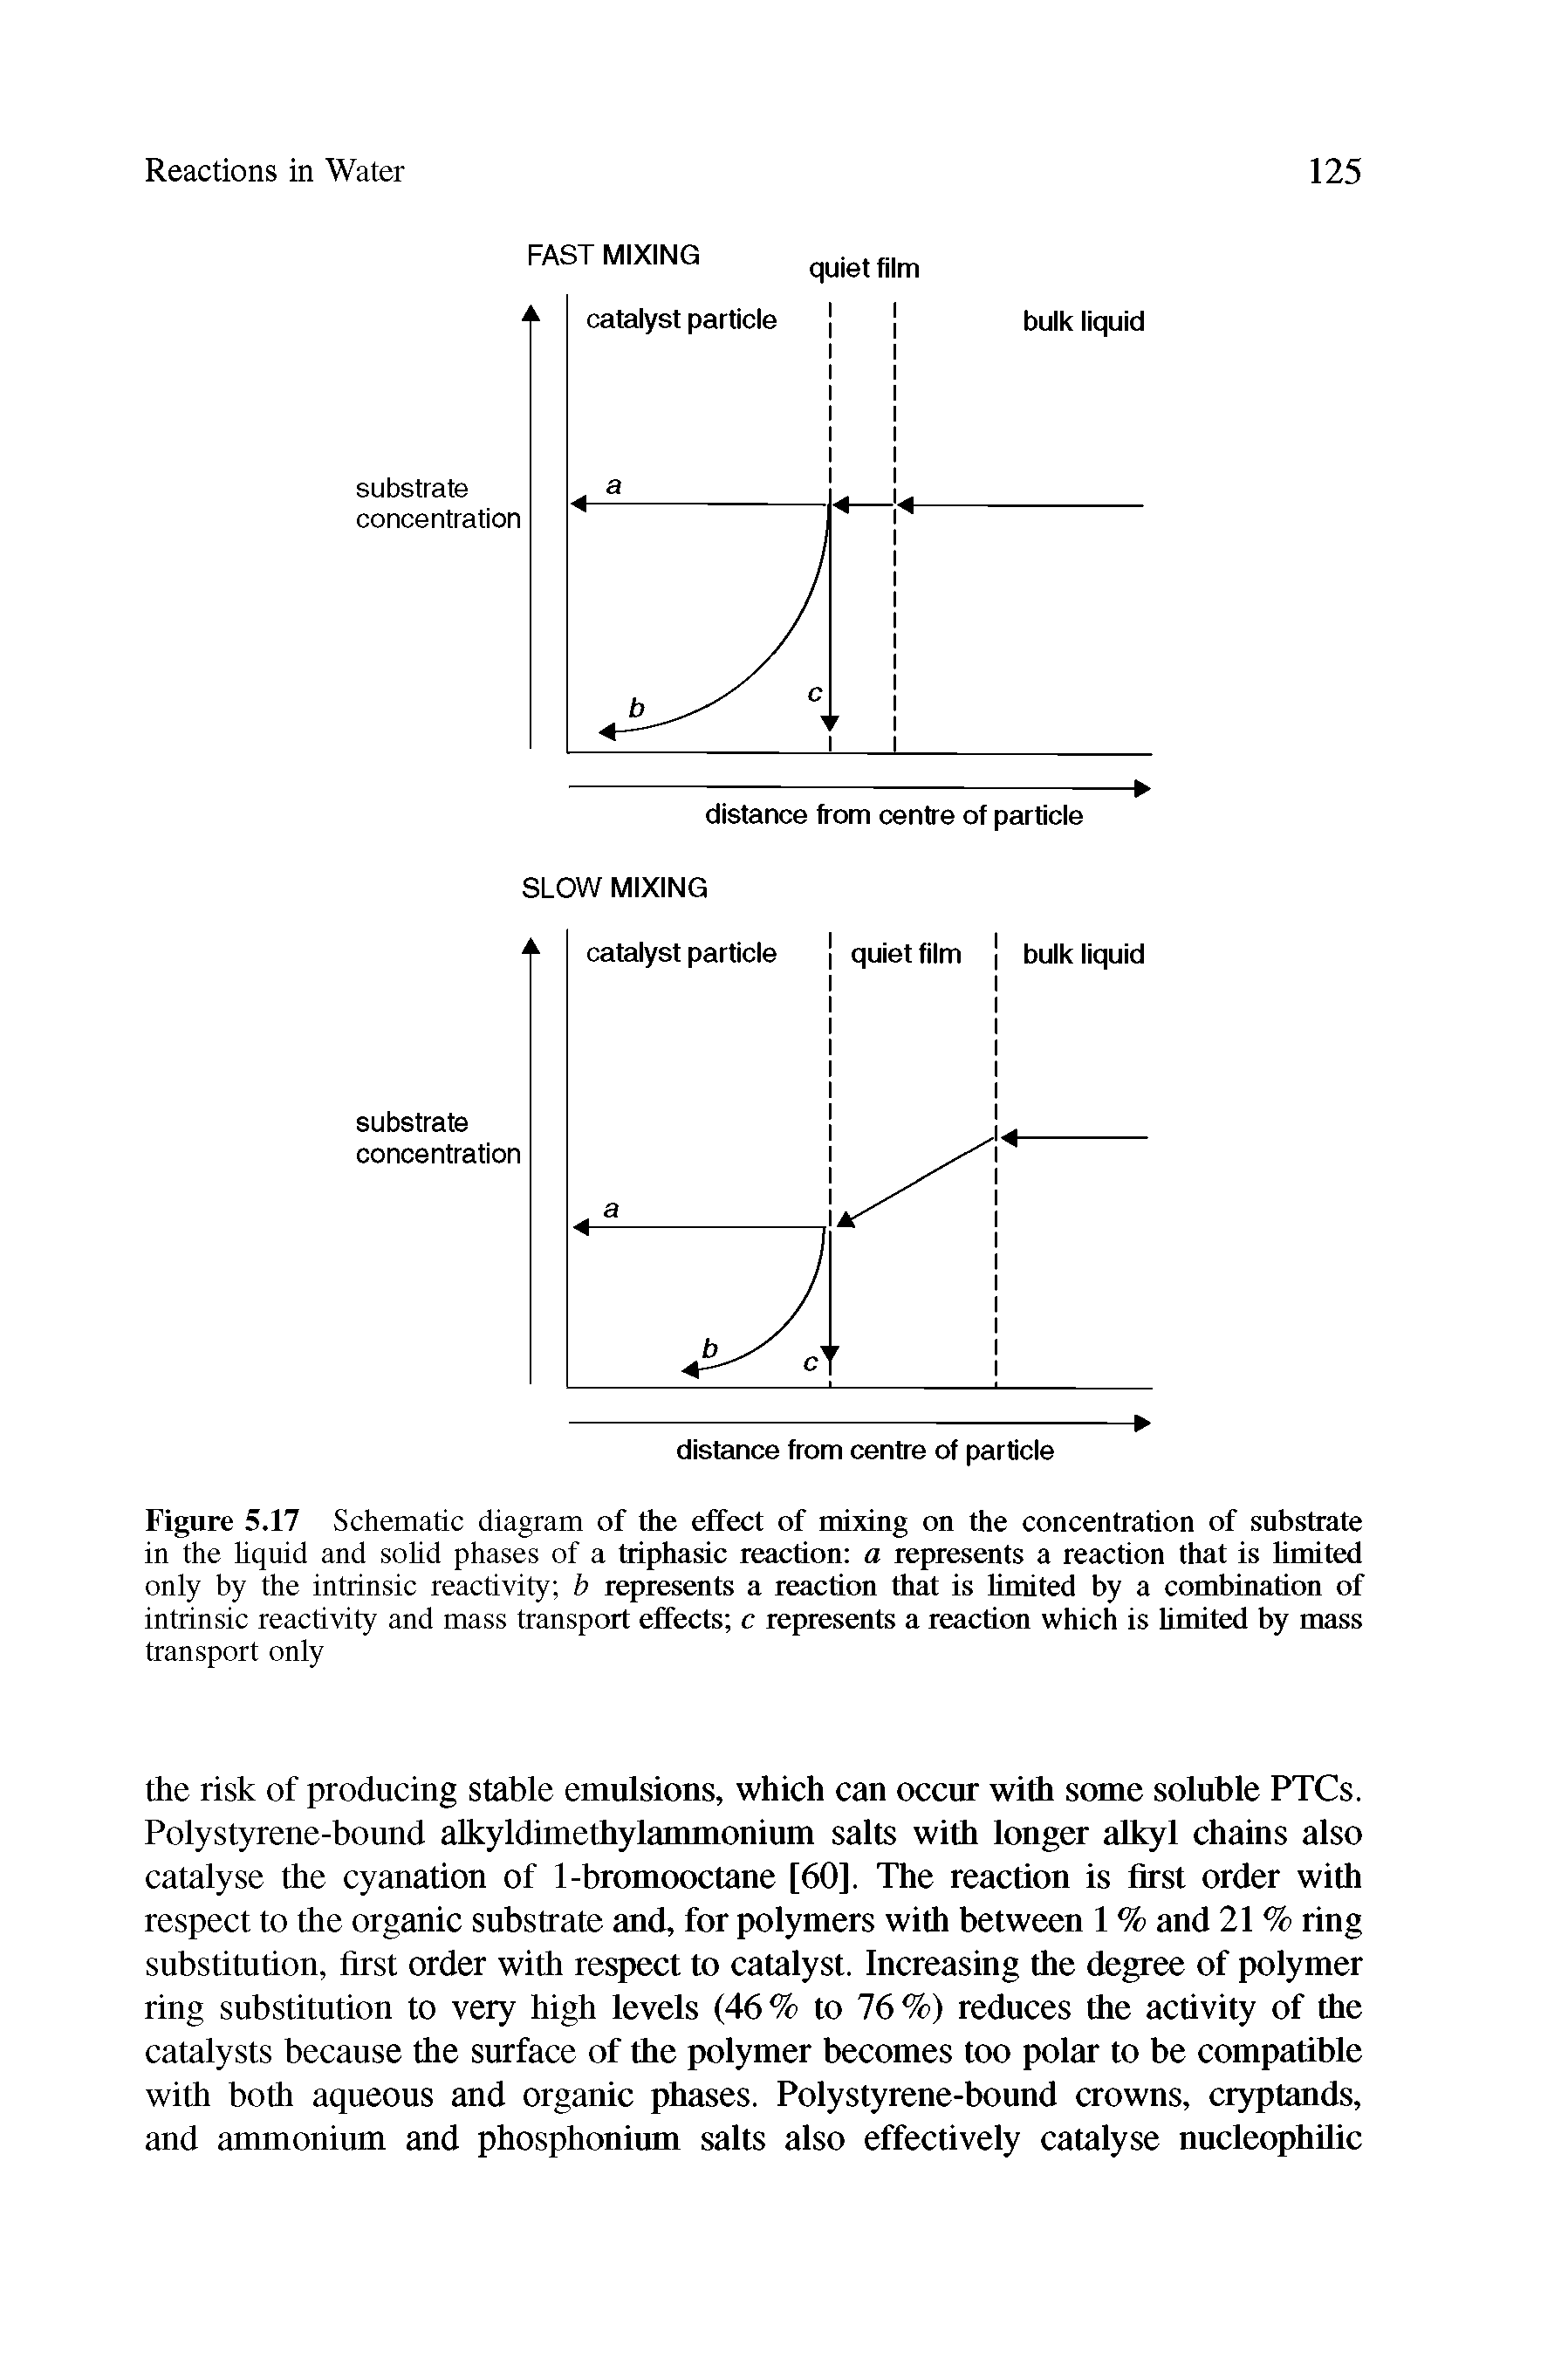 Figure 5.17 Schematic diagram of the effect of mixing on the concentration of substrate in the liquid and solid phases of a triphasic reaction a represents a reaction that is limited only by the intrinsic reactivity b represents a reaction that is limited by a combination of intrinsic reactivity and mass transport effects c represents a reaction which is limited by mass transport only...